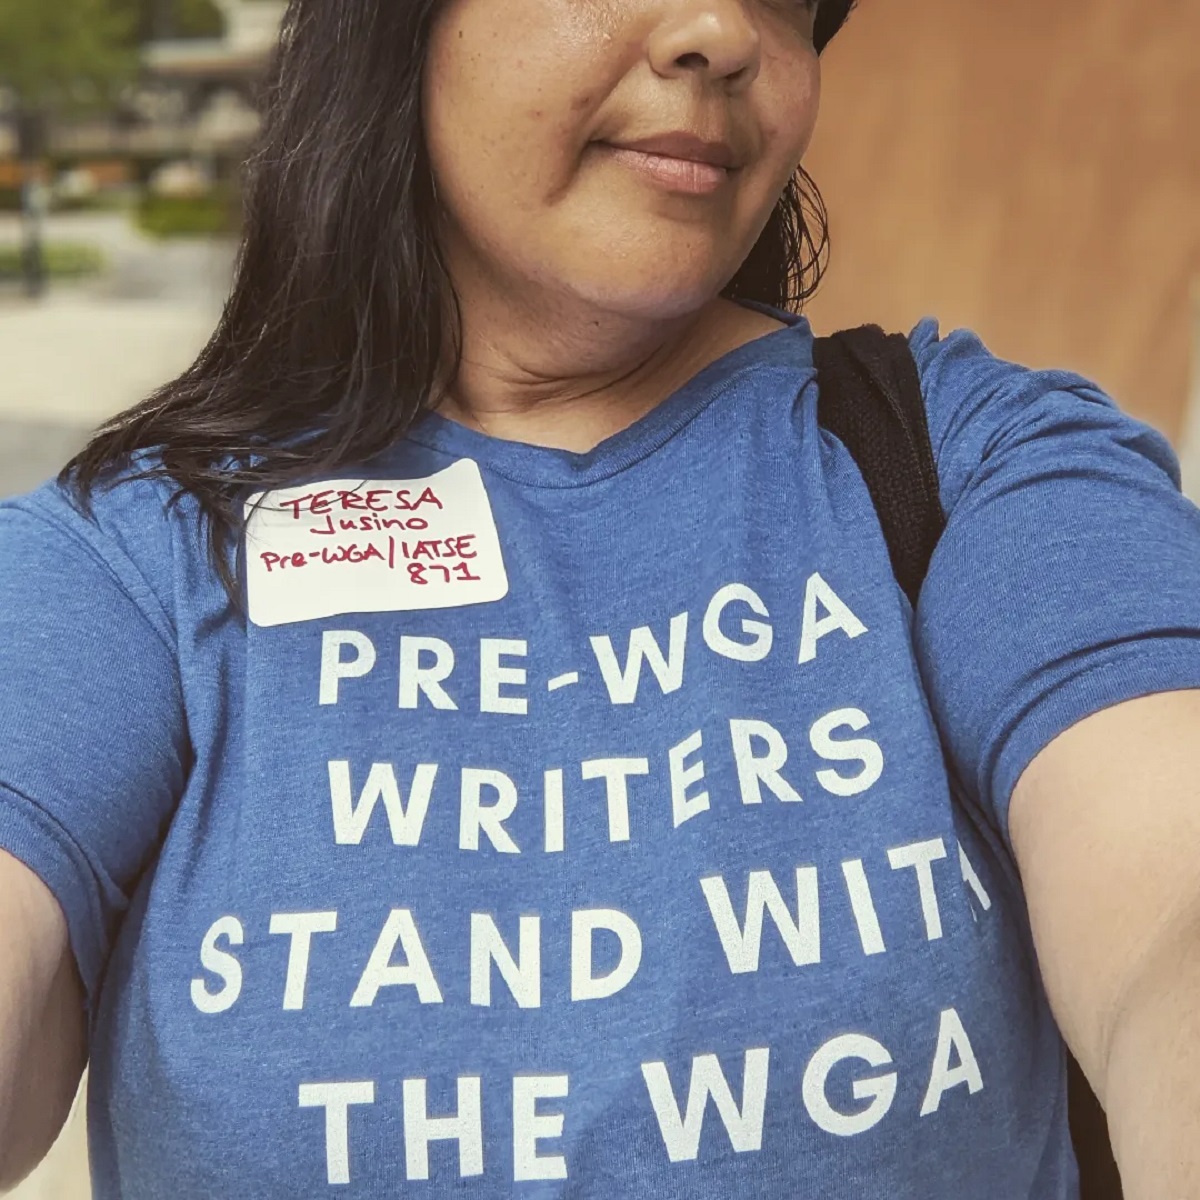 Square image of Teresa Jusino (a brown Latina with long, black hair) from the nose down showing off her t-shirt. The t-shirt is blue and reads "Pre-WGA Writers Stand With the WGA." She's also wearing a nametag that reads "Teresa Jusino - Pre-WGA/IATSE 871.